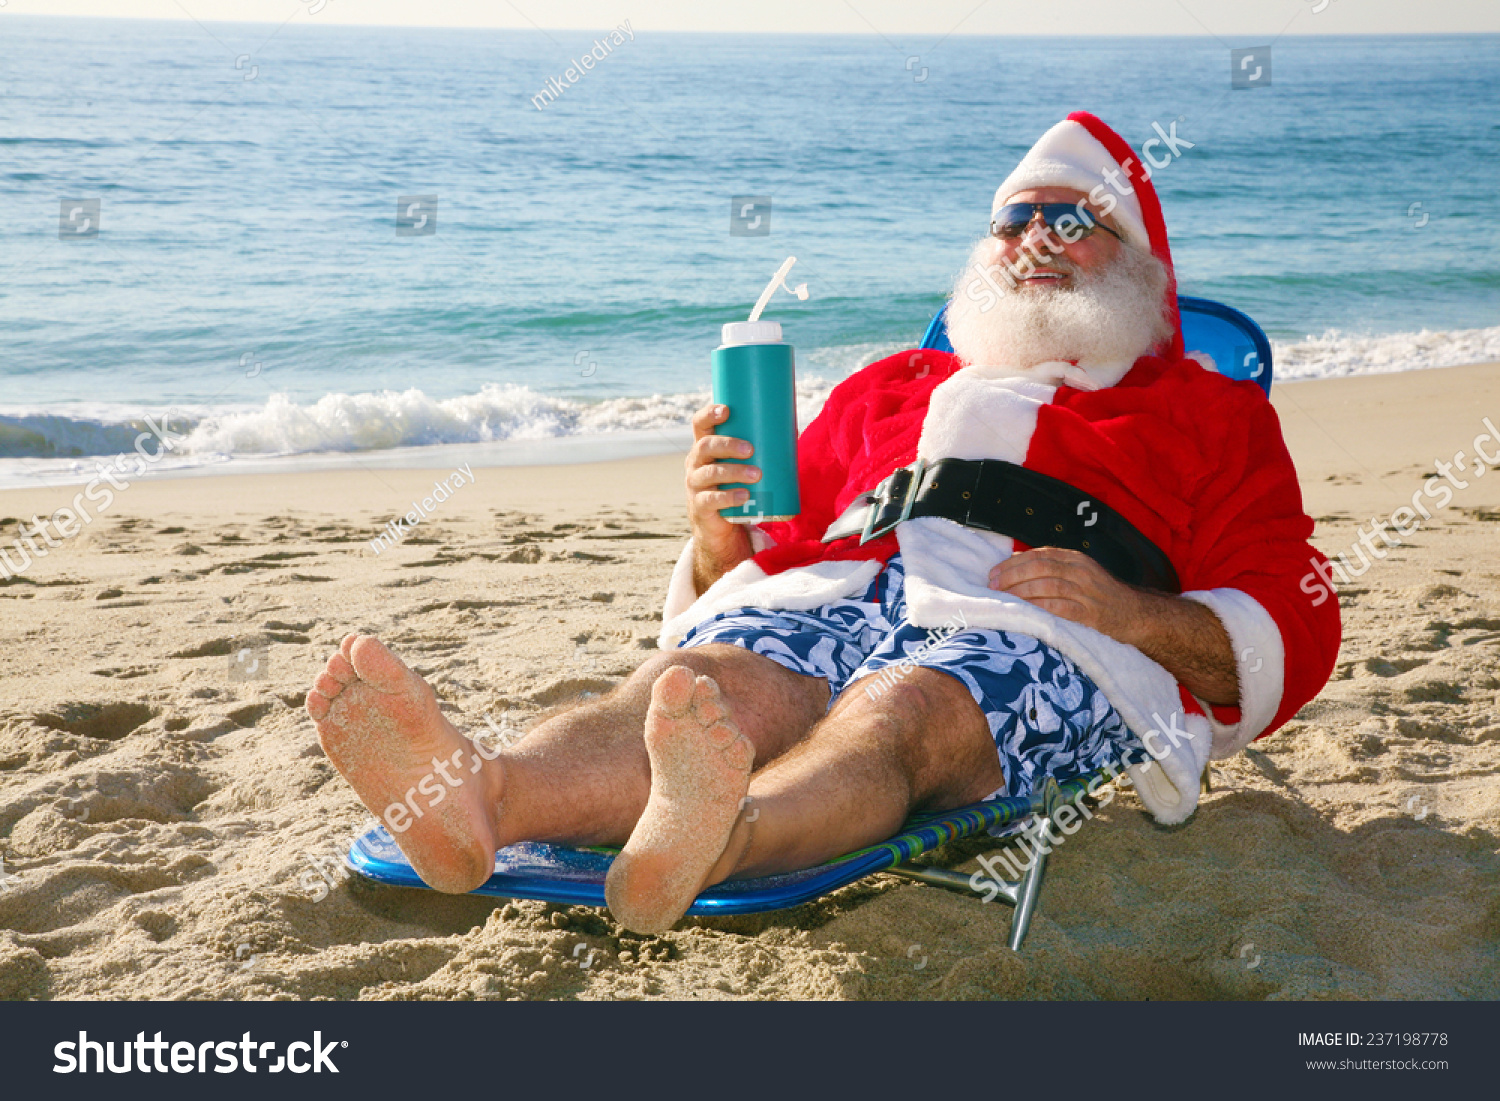 Santa Claus Relaxes Lying On Beach Stock Photo 237198778 - Shutterstock